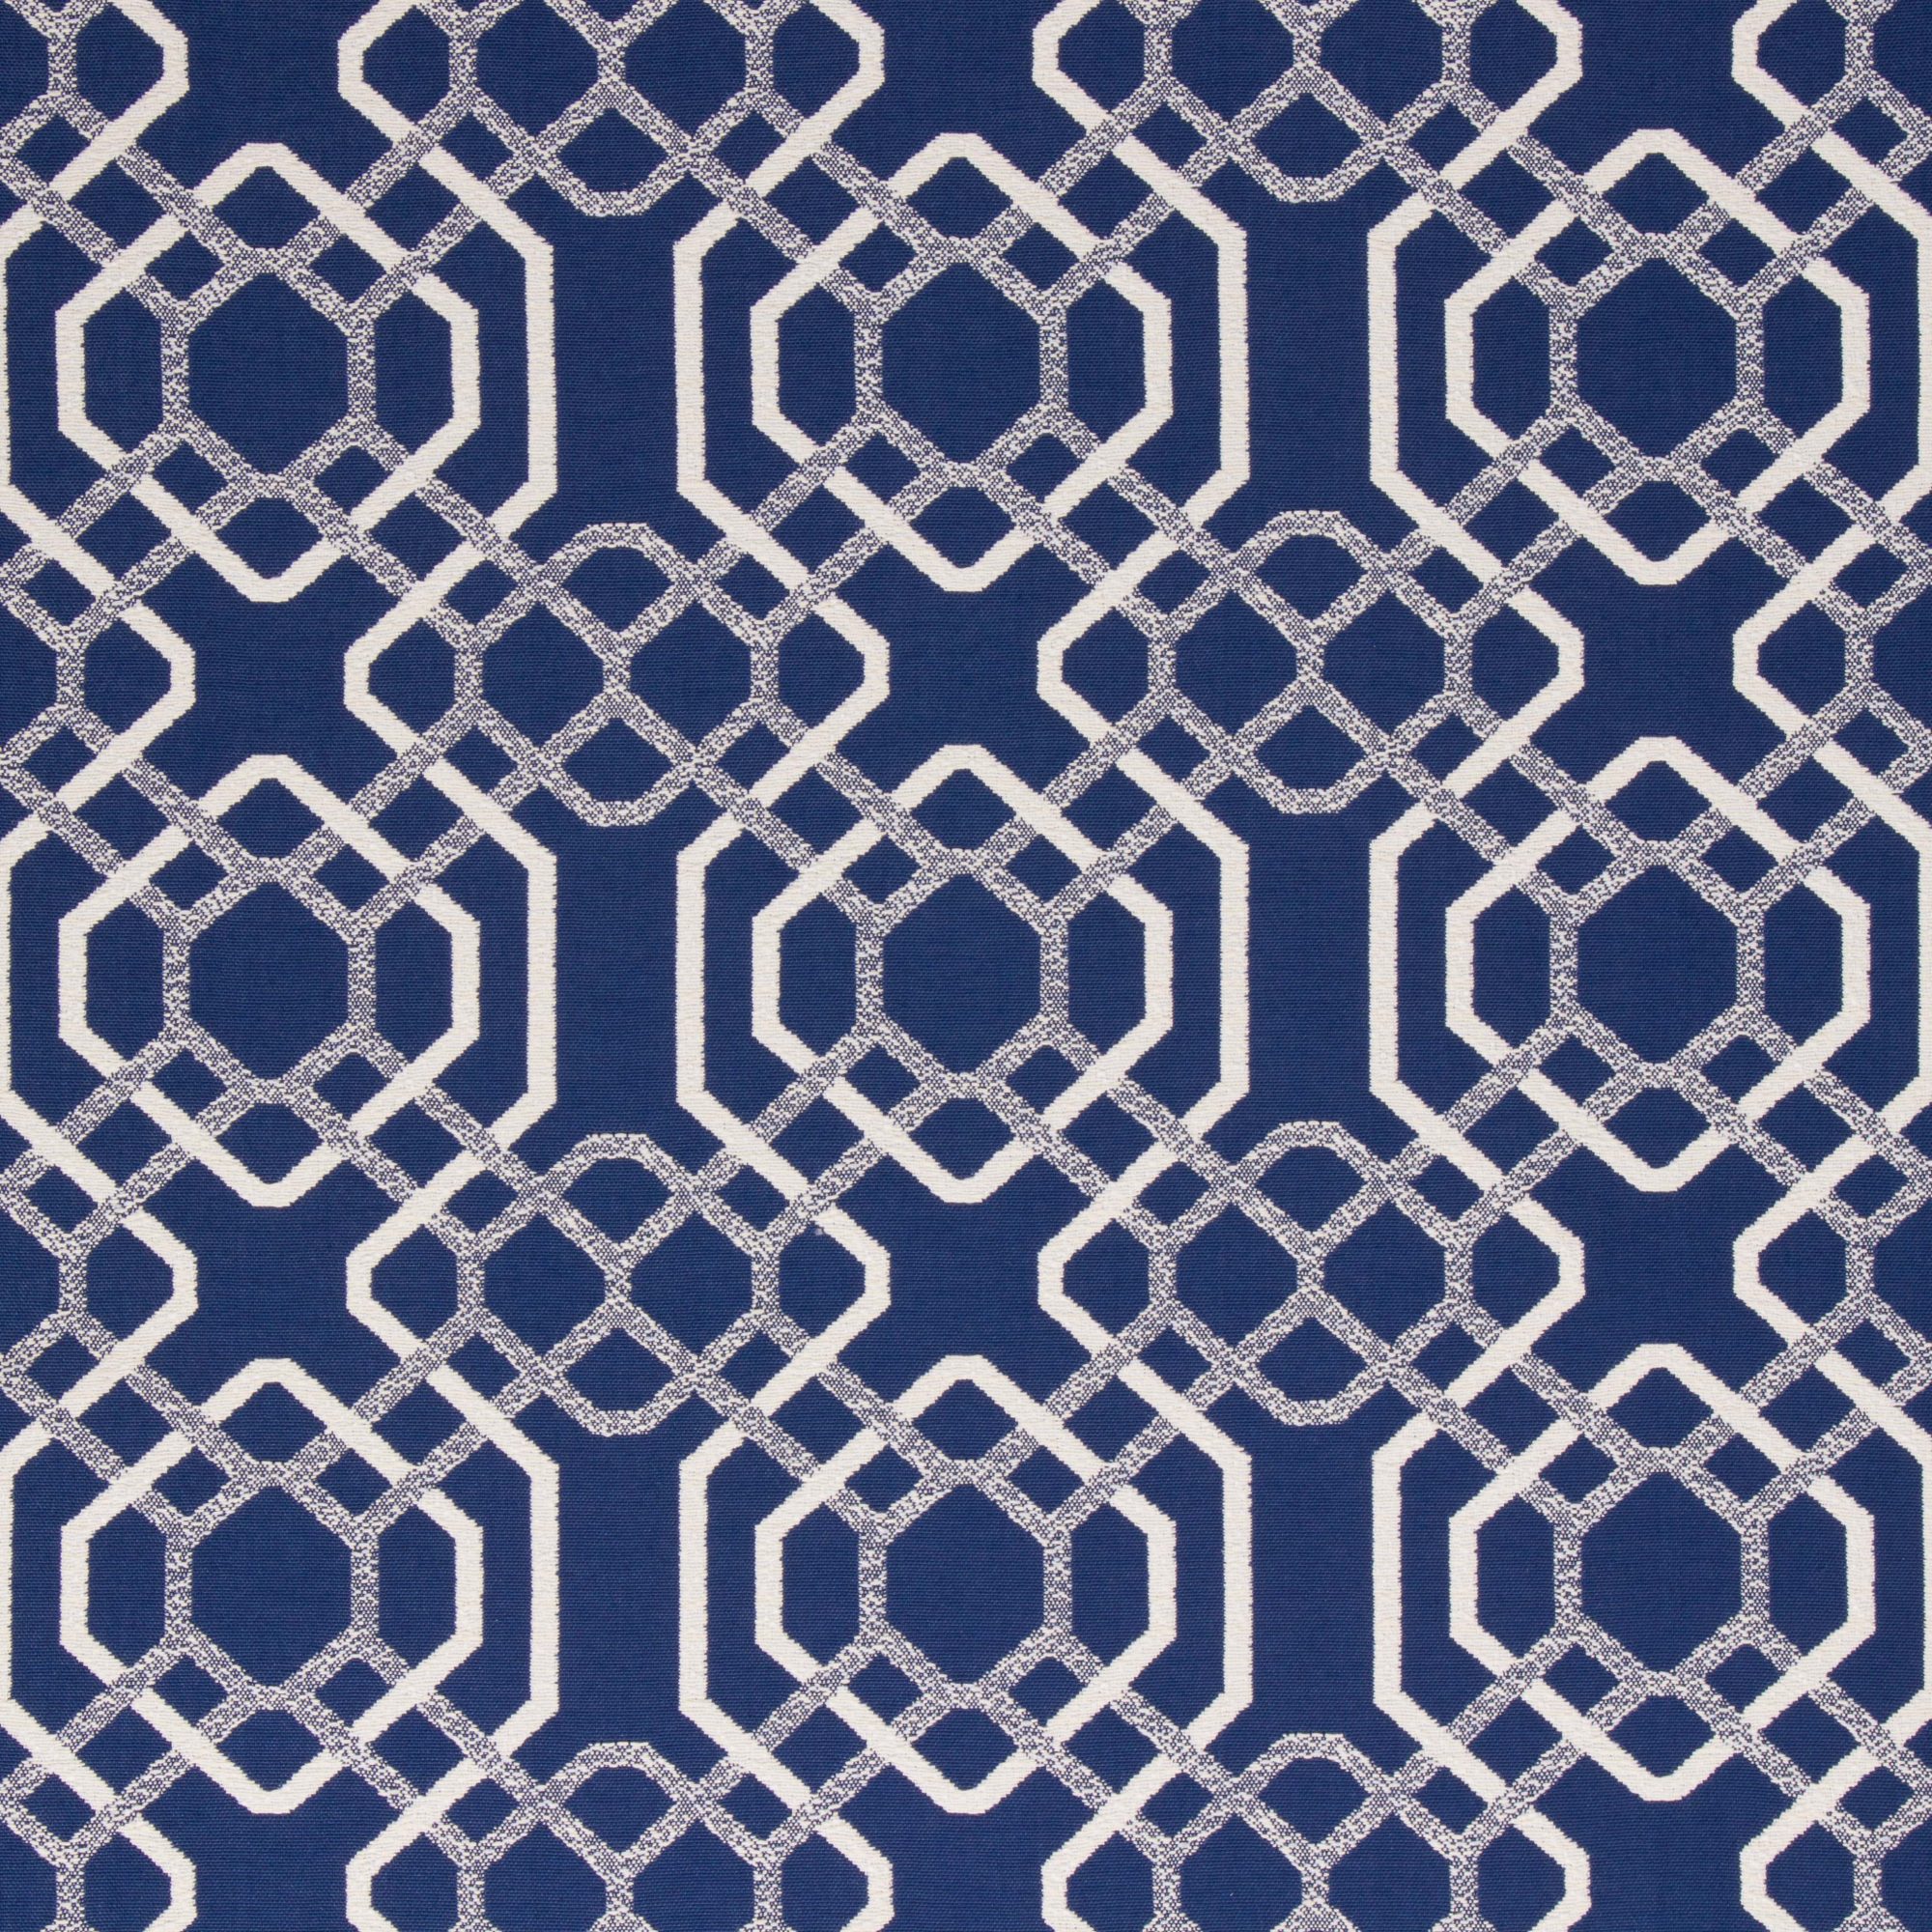 Bella Dura and Bella Dura Home cut yardage in the Alexandria pattern and Marine color.